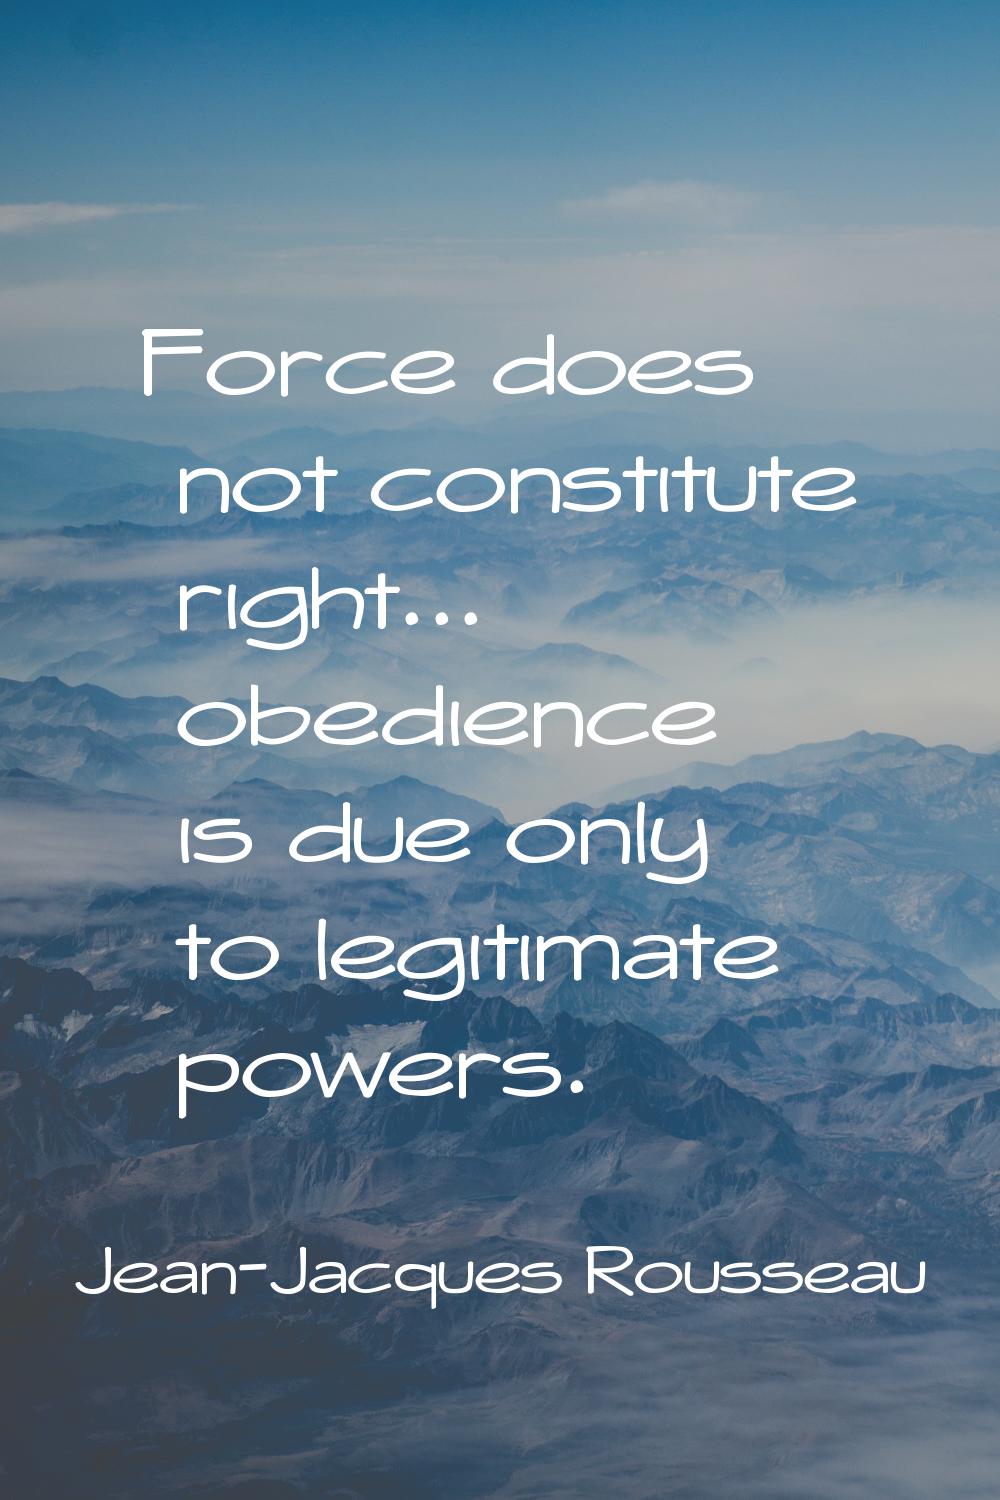 Force does not constitute right... obedience is due only to legitimate powers.